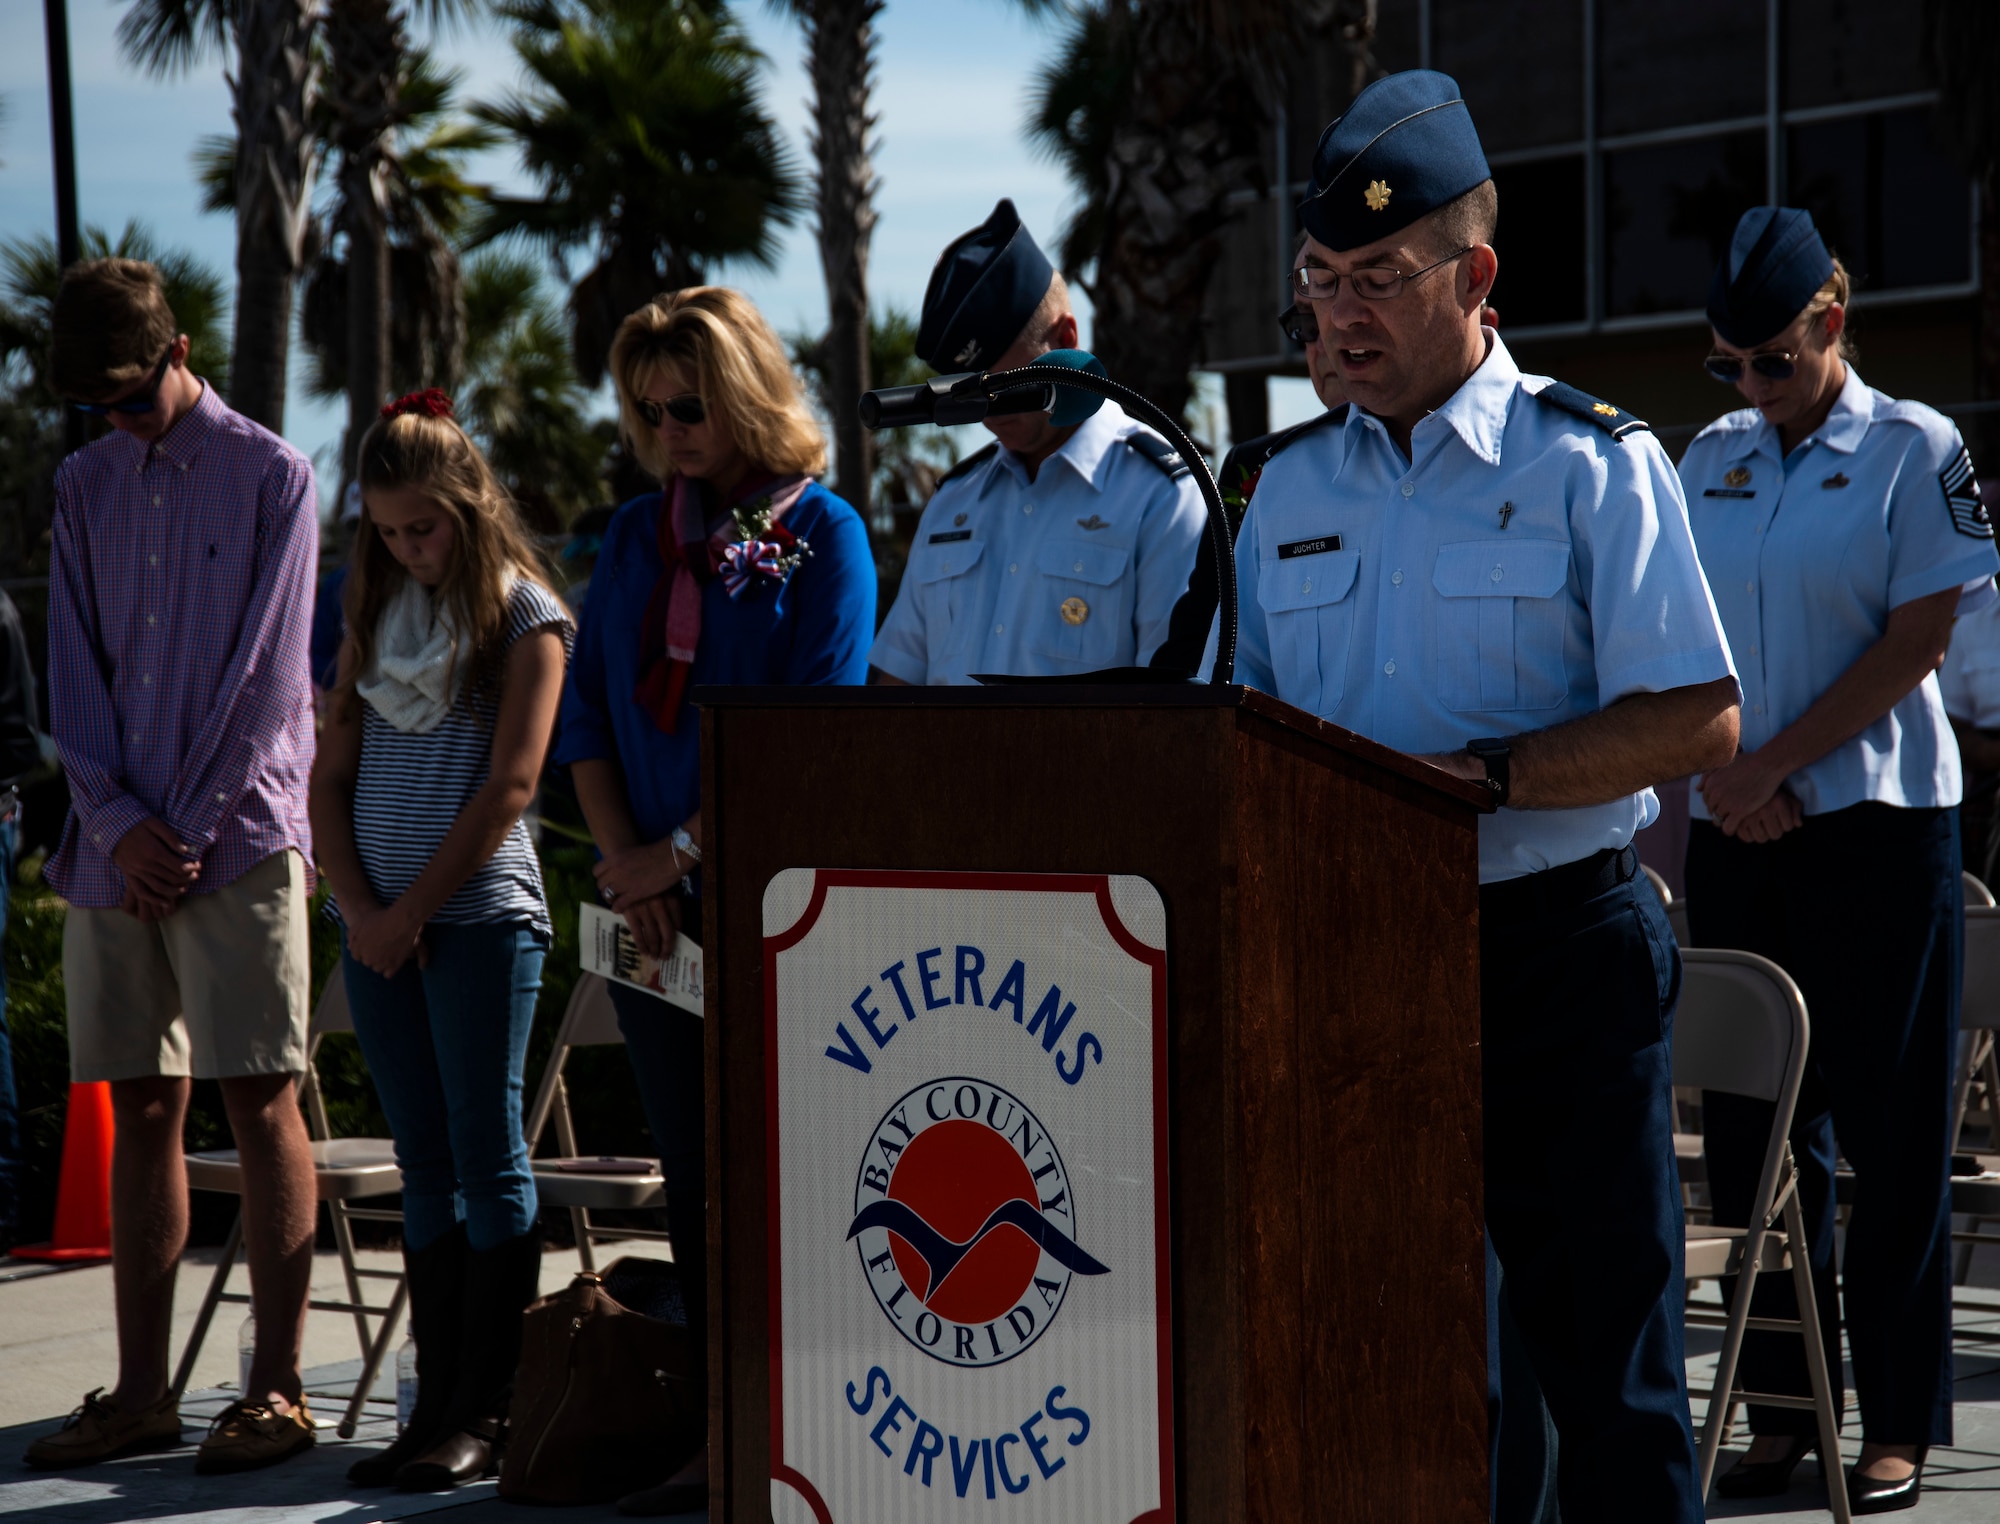 Maj. Mark Juchter, 325th Fighter Wing Religious Affairs chaplain, delivers an invocation at the annual Veterans Day parade celebration and wreath laying ceremony on Nov. 11, 2019, at Panama City, Florida. The annual event celebrated those who served in the past and to honor the sacrifices made by the service member as well as their families, both at home and abroad. (U.S. Air Force photo by Staff Sgt. Magen M. Reeves)